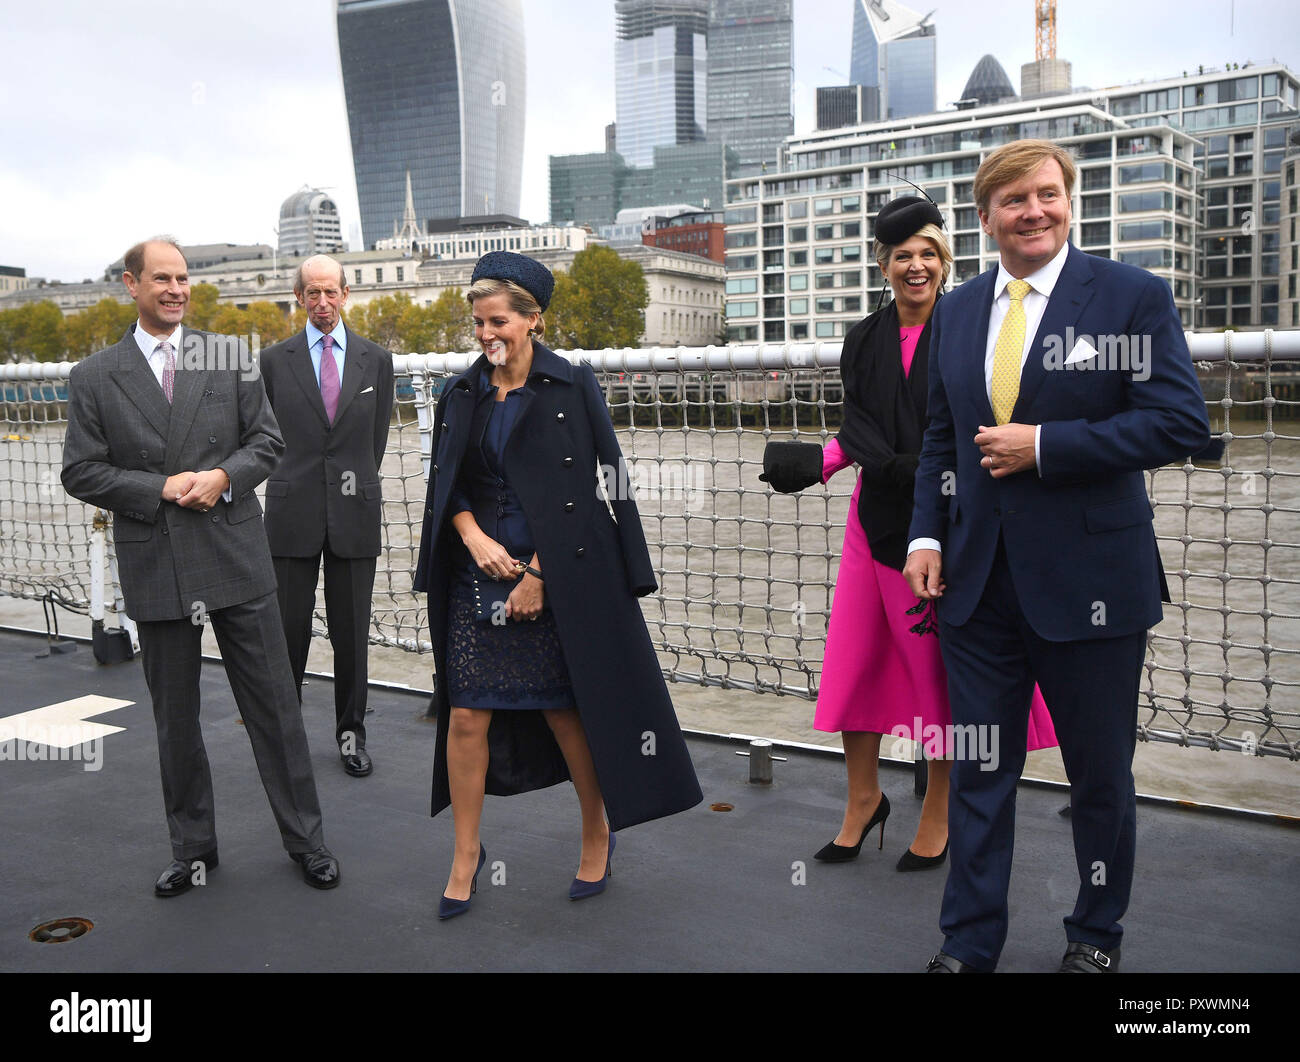 (Left to right) The Earl of Wessex, The Duke of Kent, Countess of Wessex, Queen Maxima and King Willem-Alexander of the Netherlands on HMS Belfast in London to watch an on-the-water capability demonstration between the Royal Netherlands Marine Corps and the Royal Marines. Stock Photo